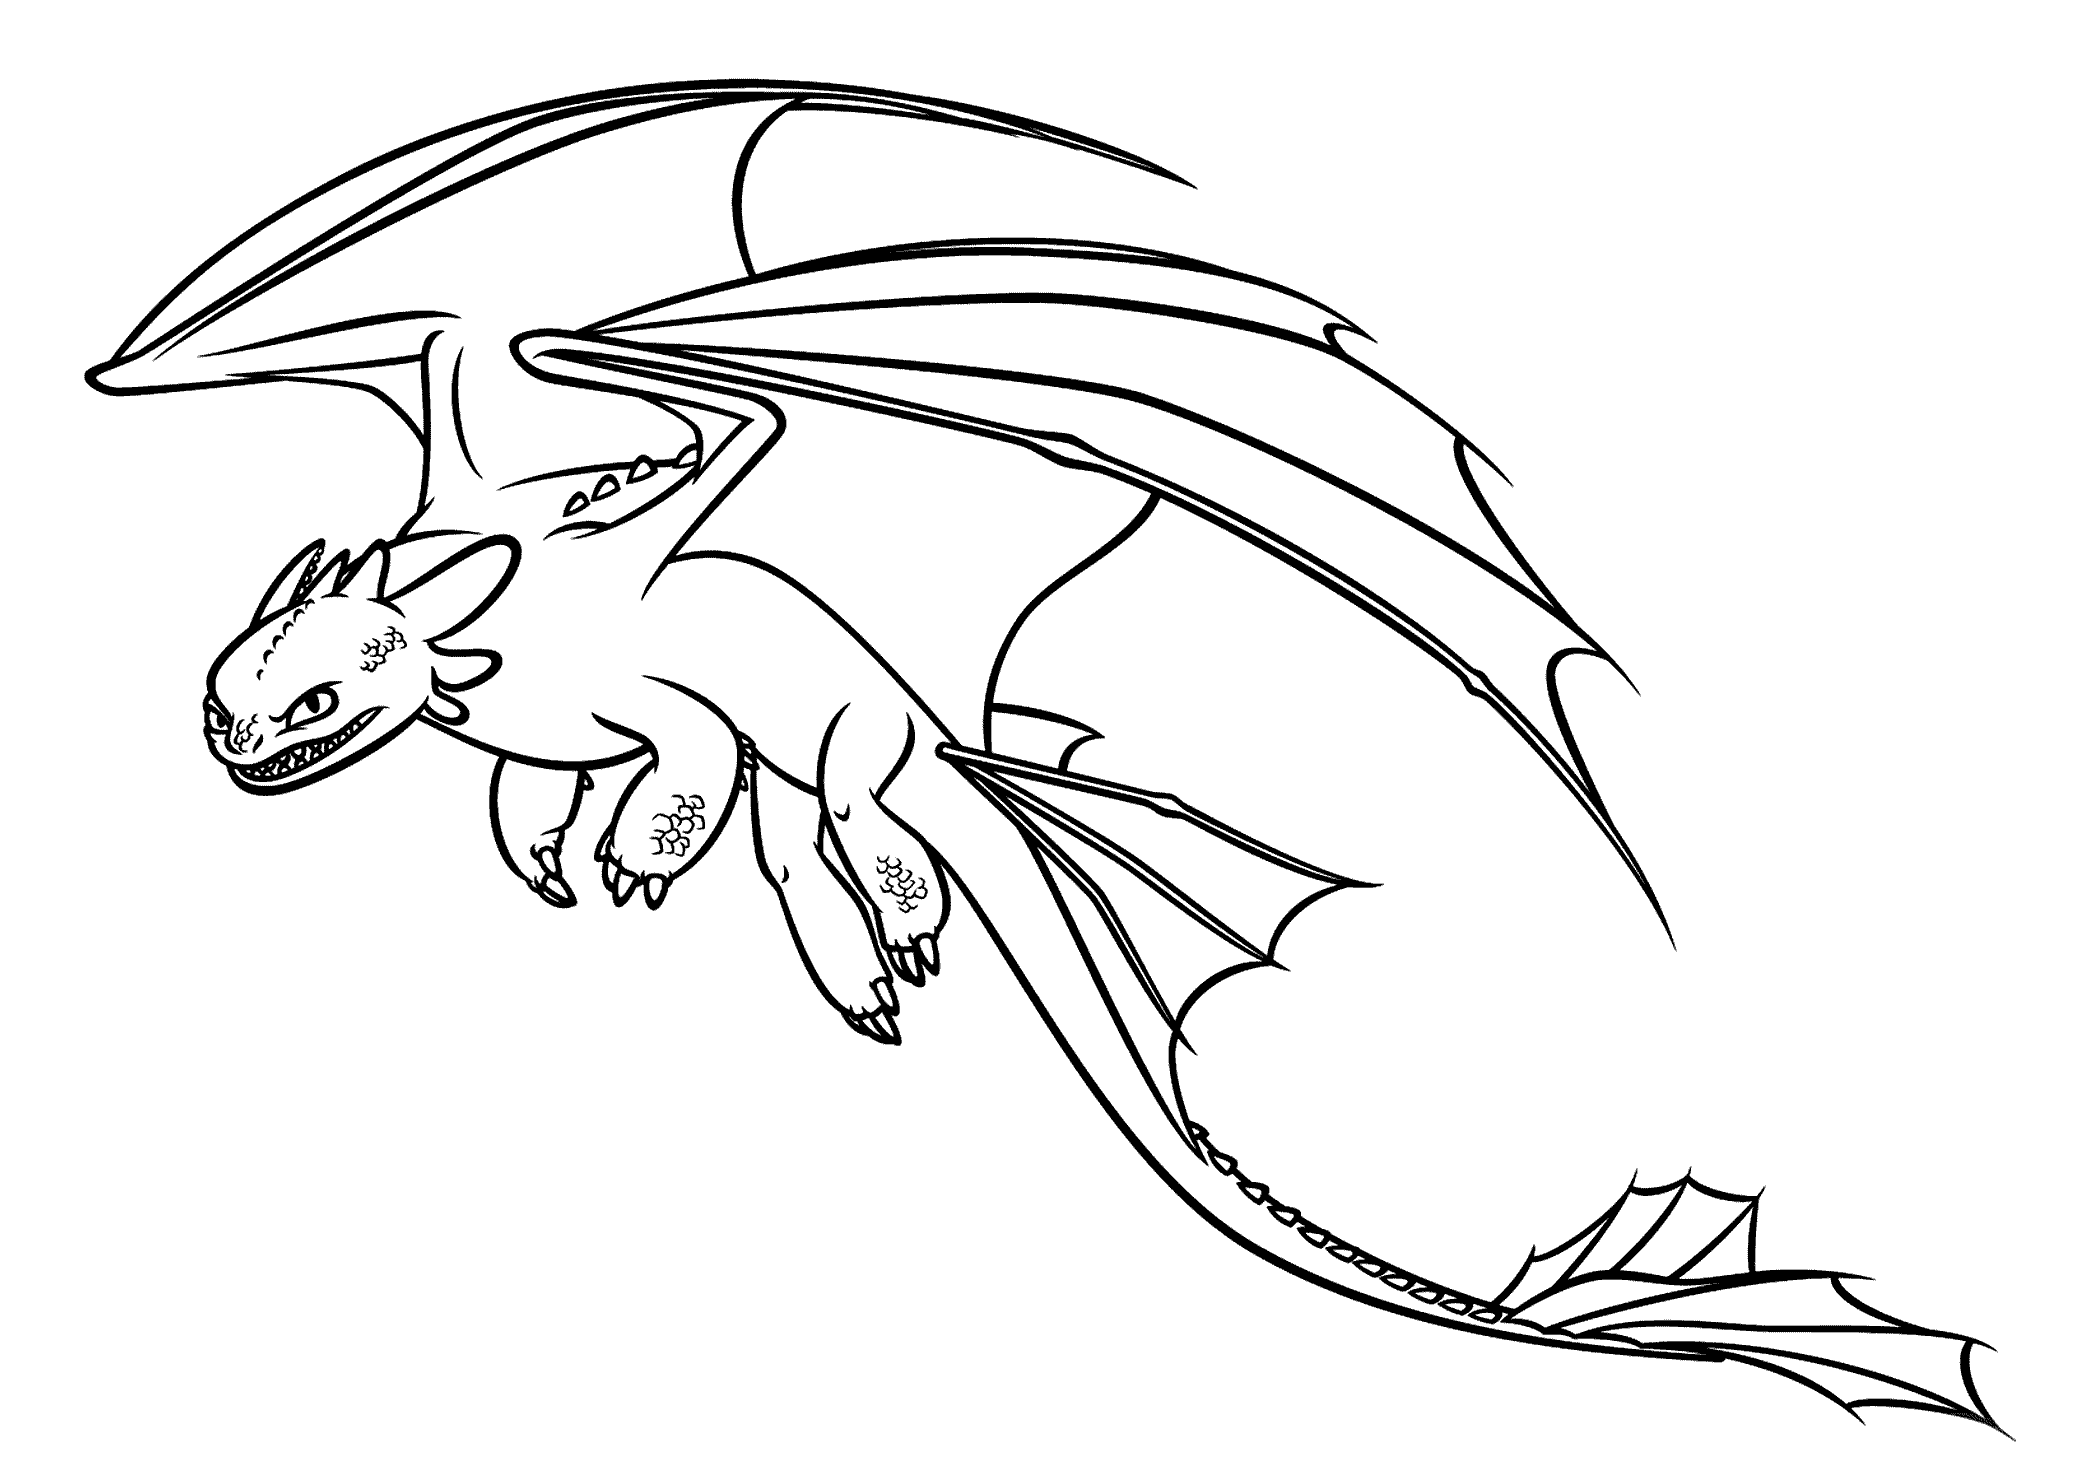 coloring dragon dragon coloring pages to download and print for free dragon coloring 